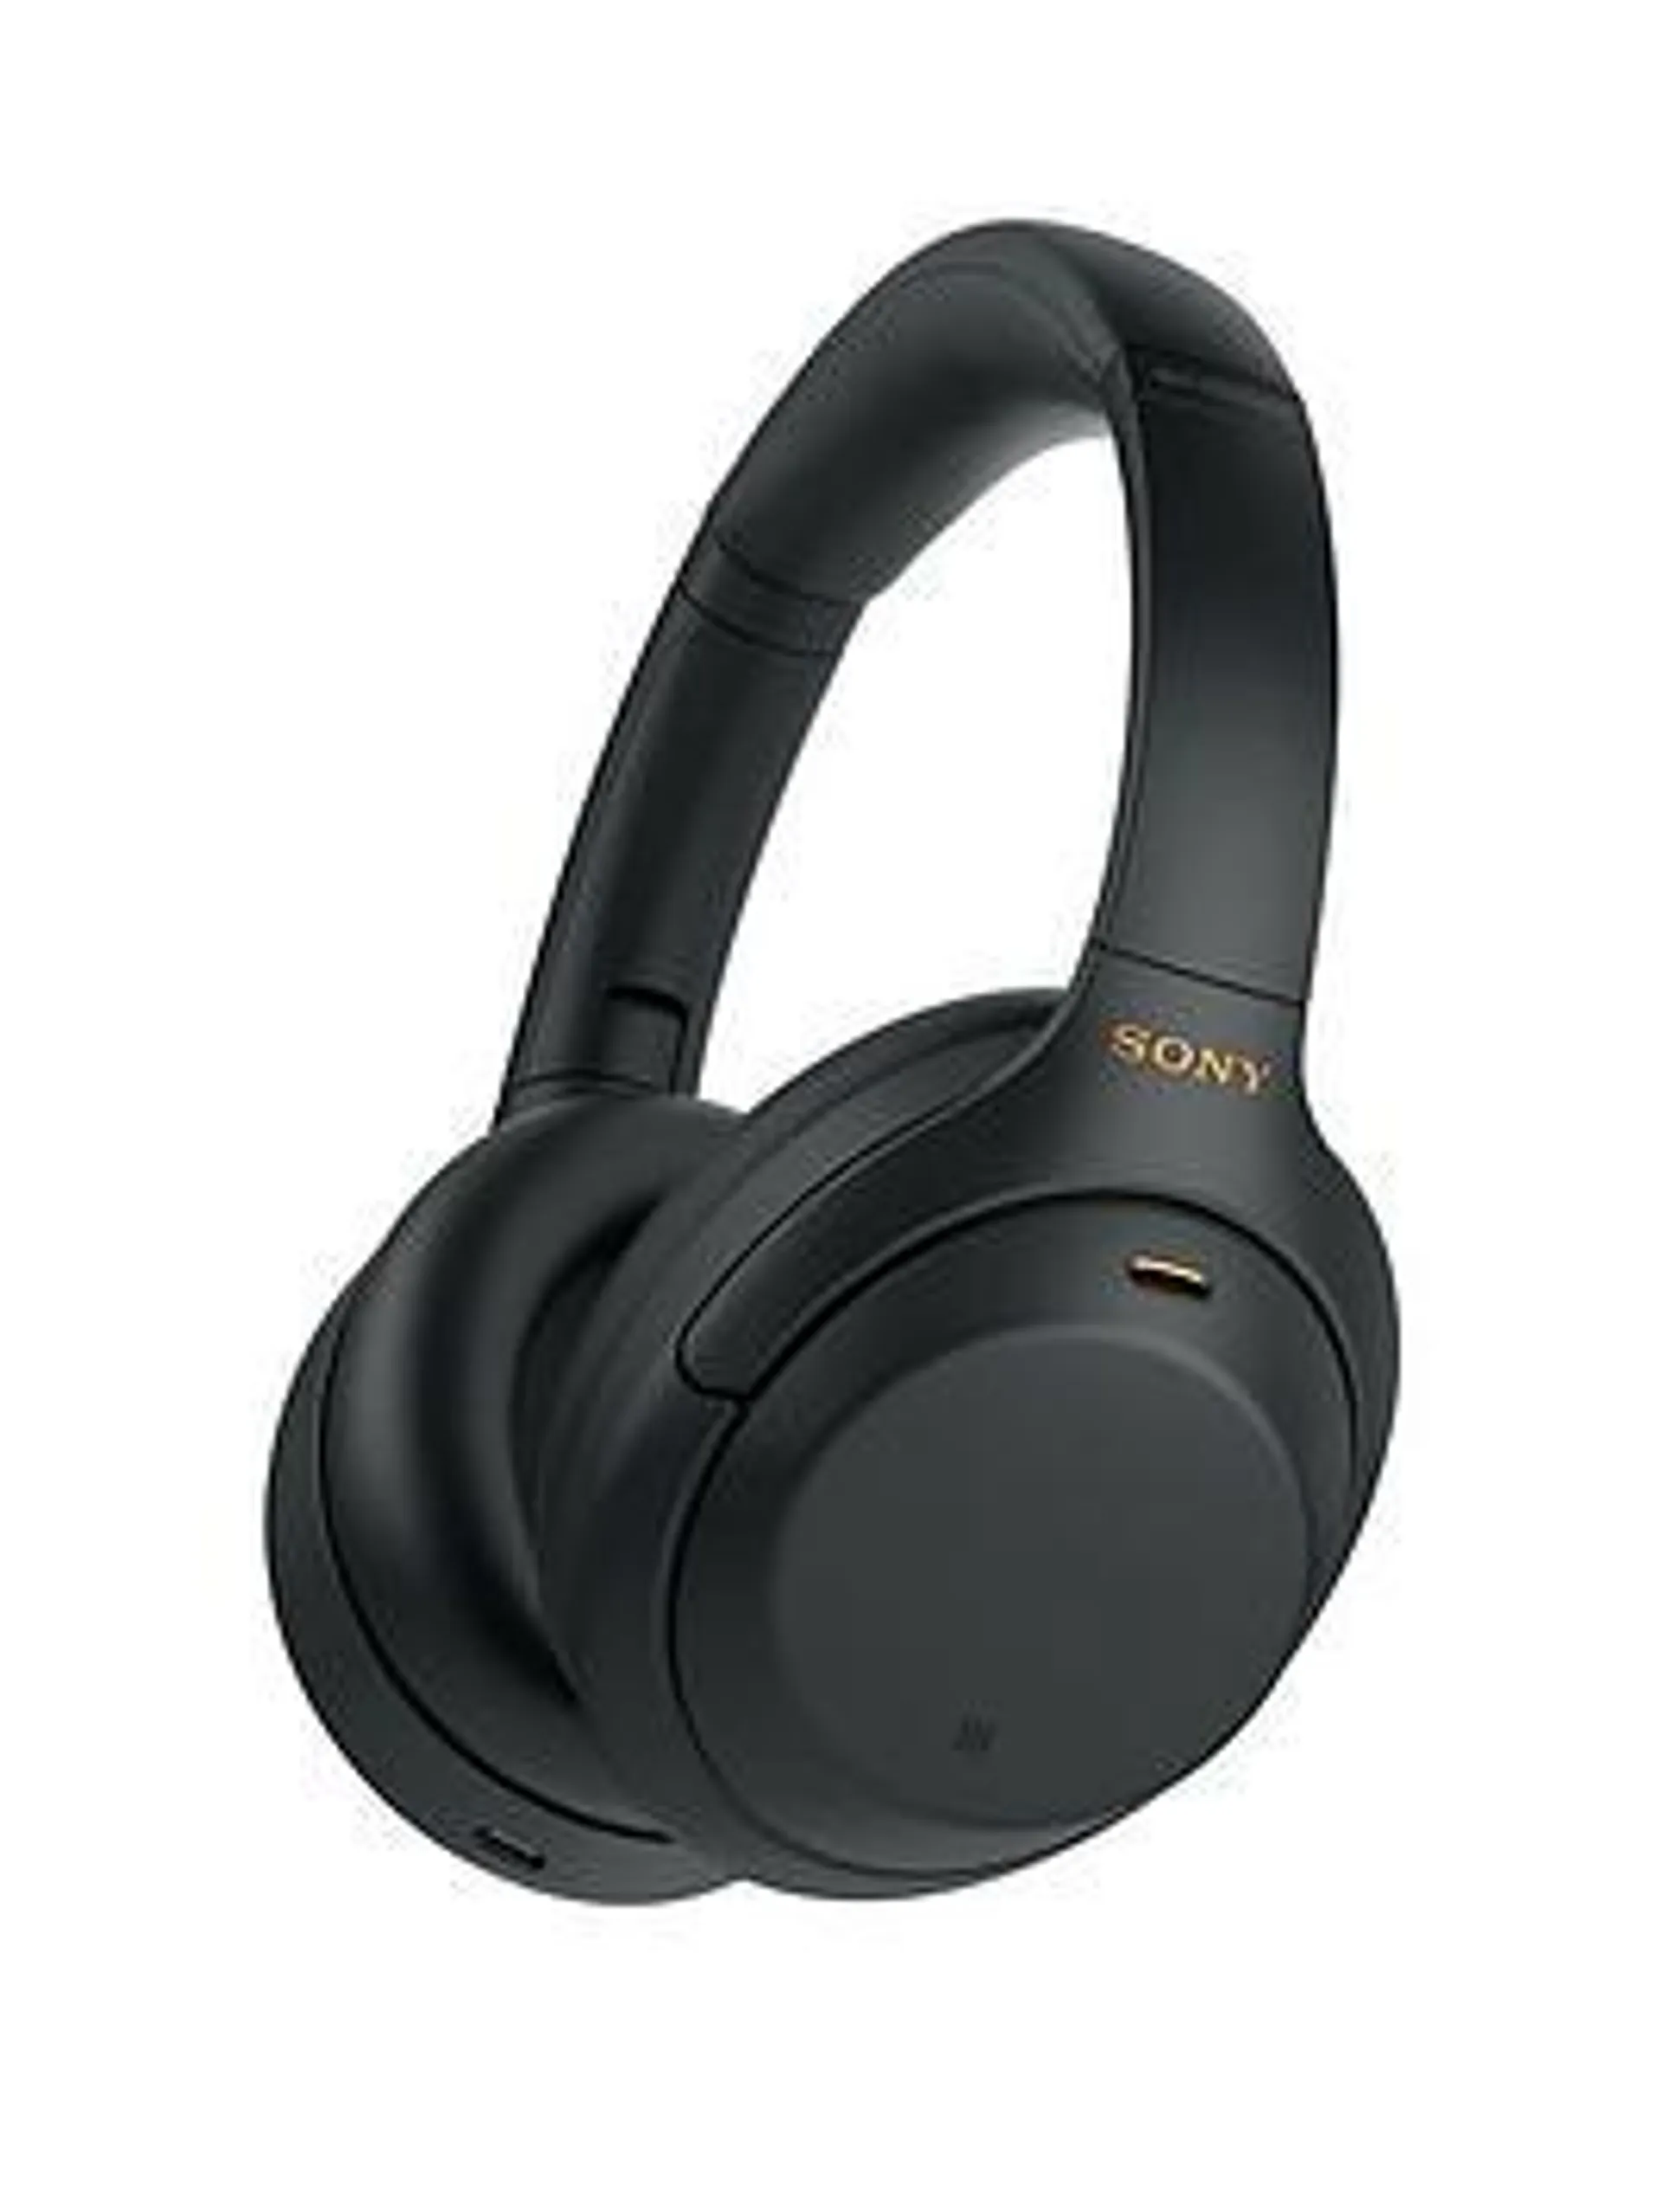 WH-1000XM4 Noise-Cancelling Wireless Headphones